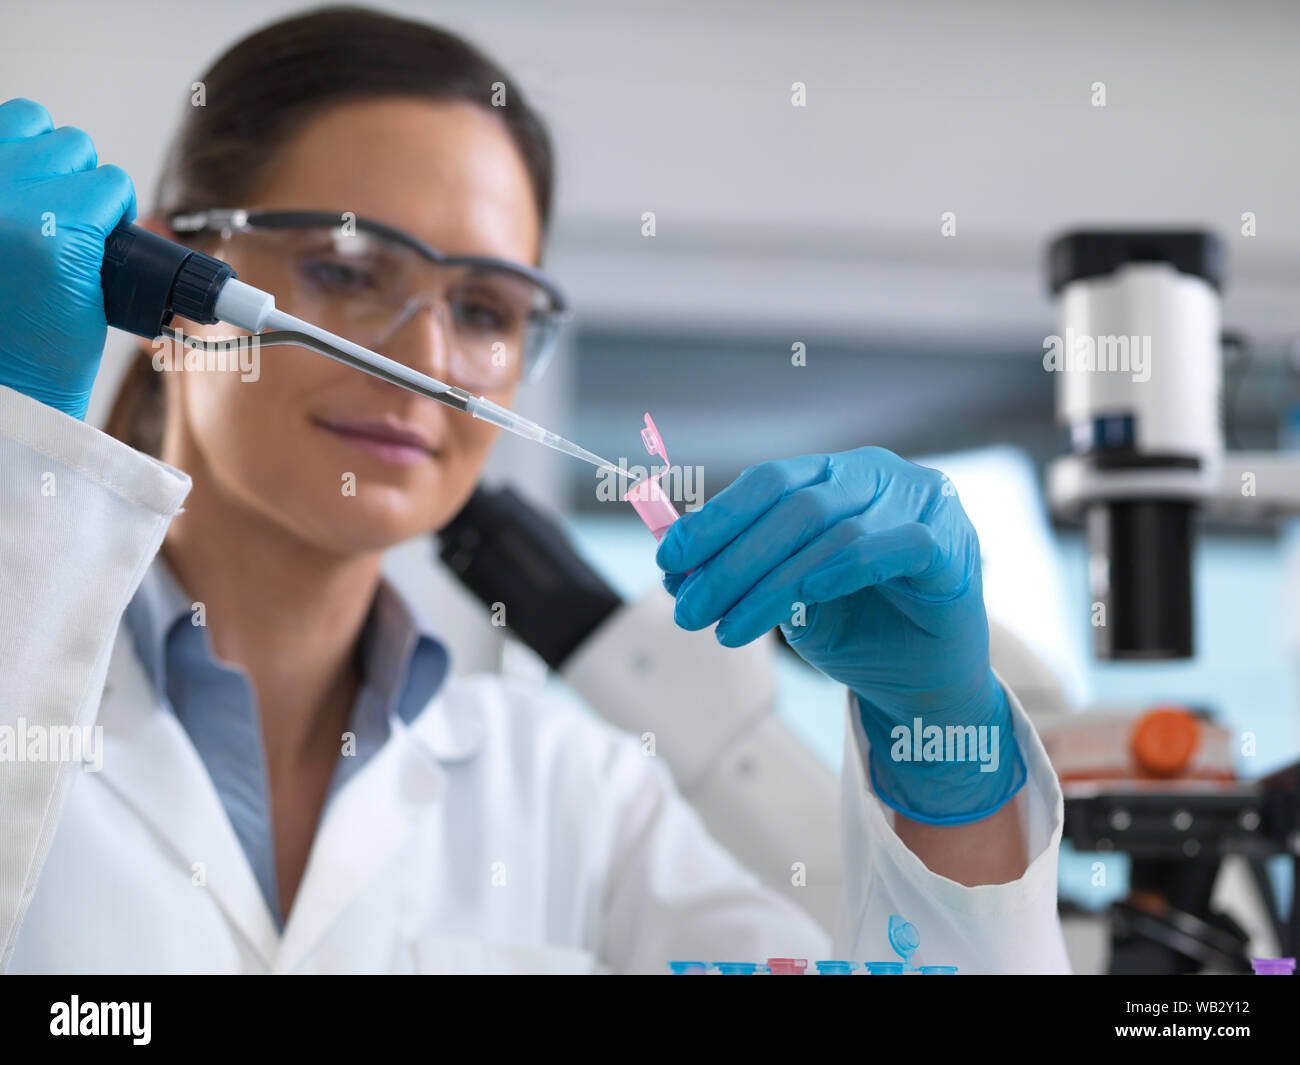 Biotechnology research. Scientist pipetting sample into a